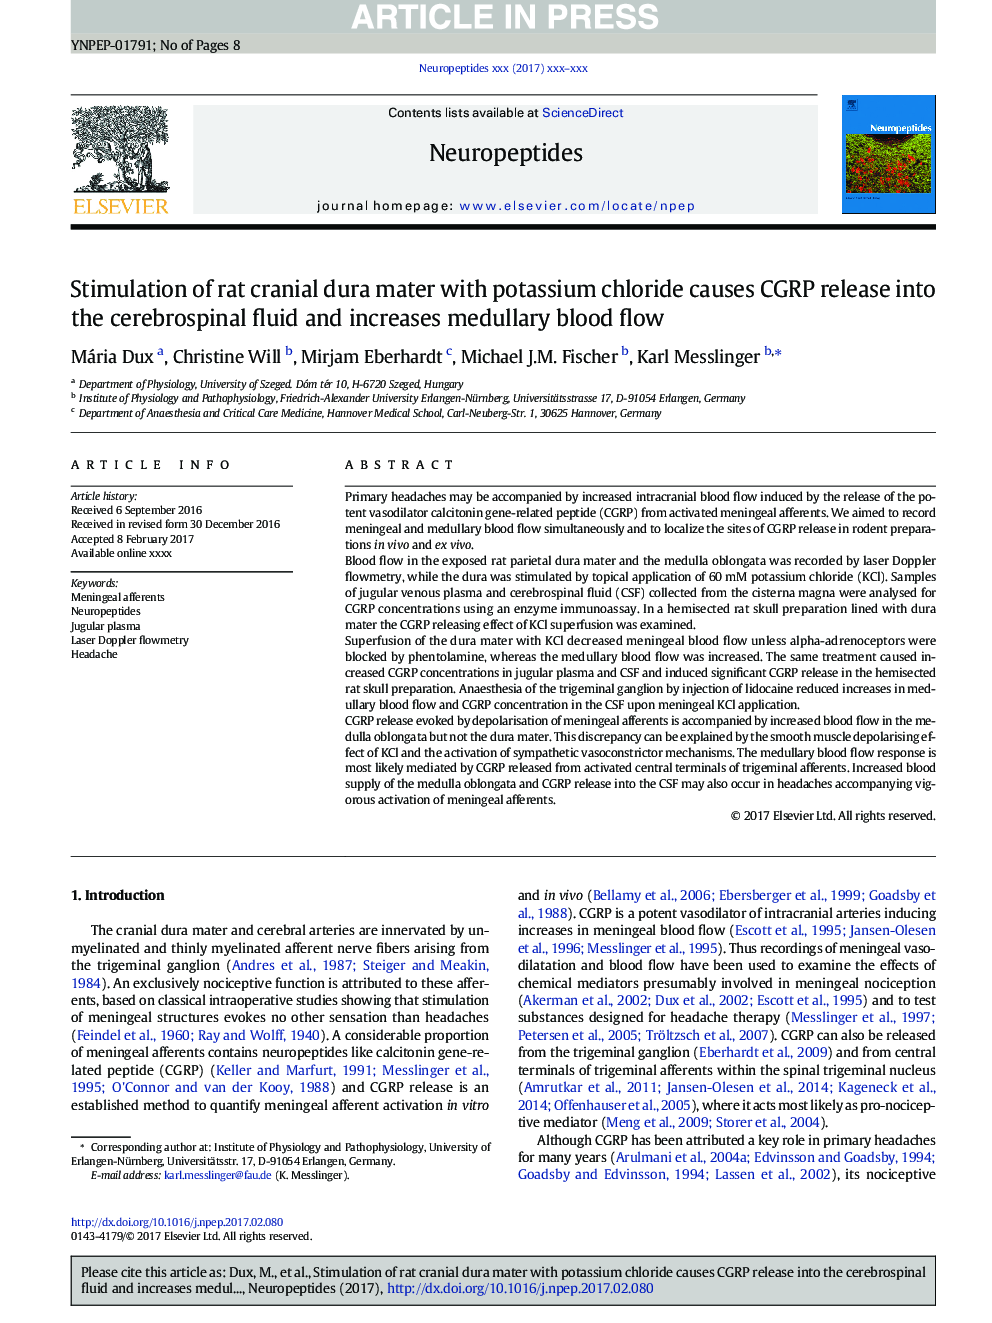 Stimulation of rat cranial dura mater with potassium chloride causes CGRP release into the cerebrospinal fluid and increases medullary blood flow